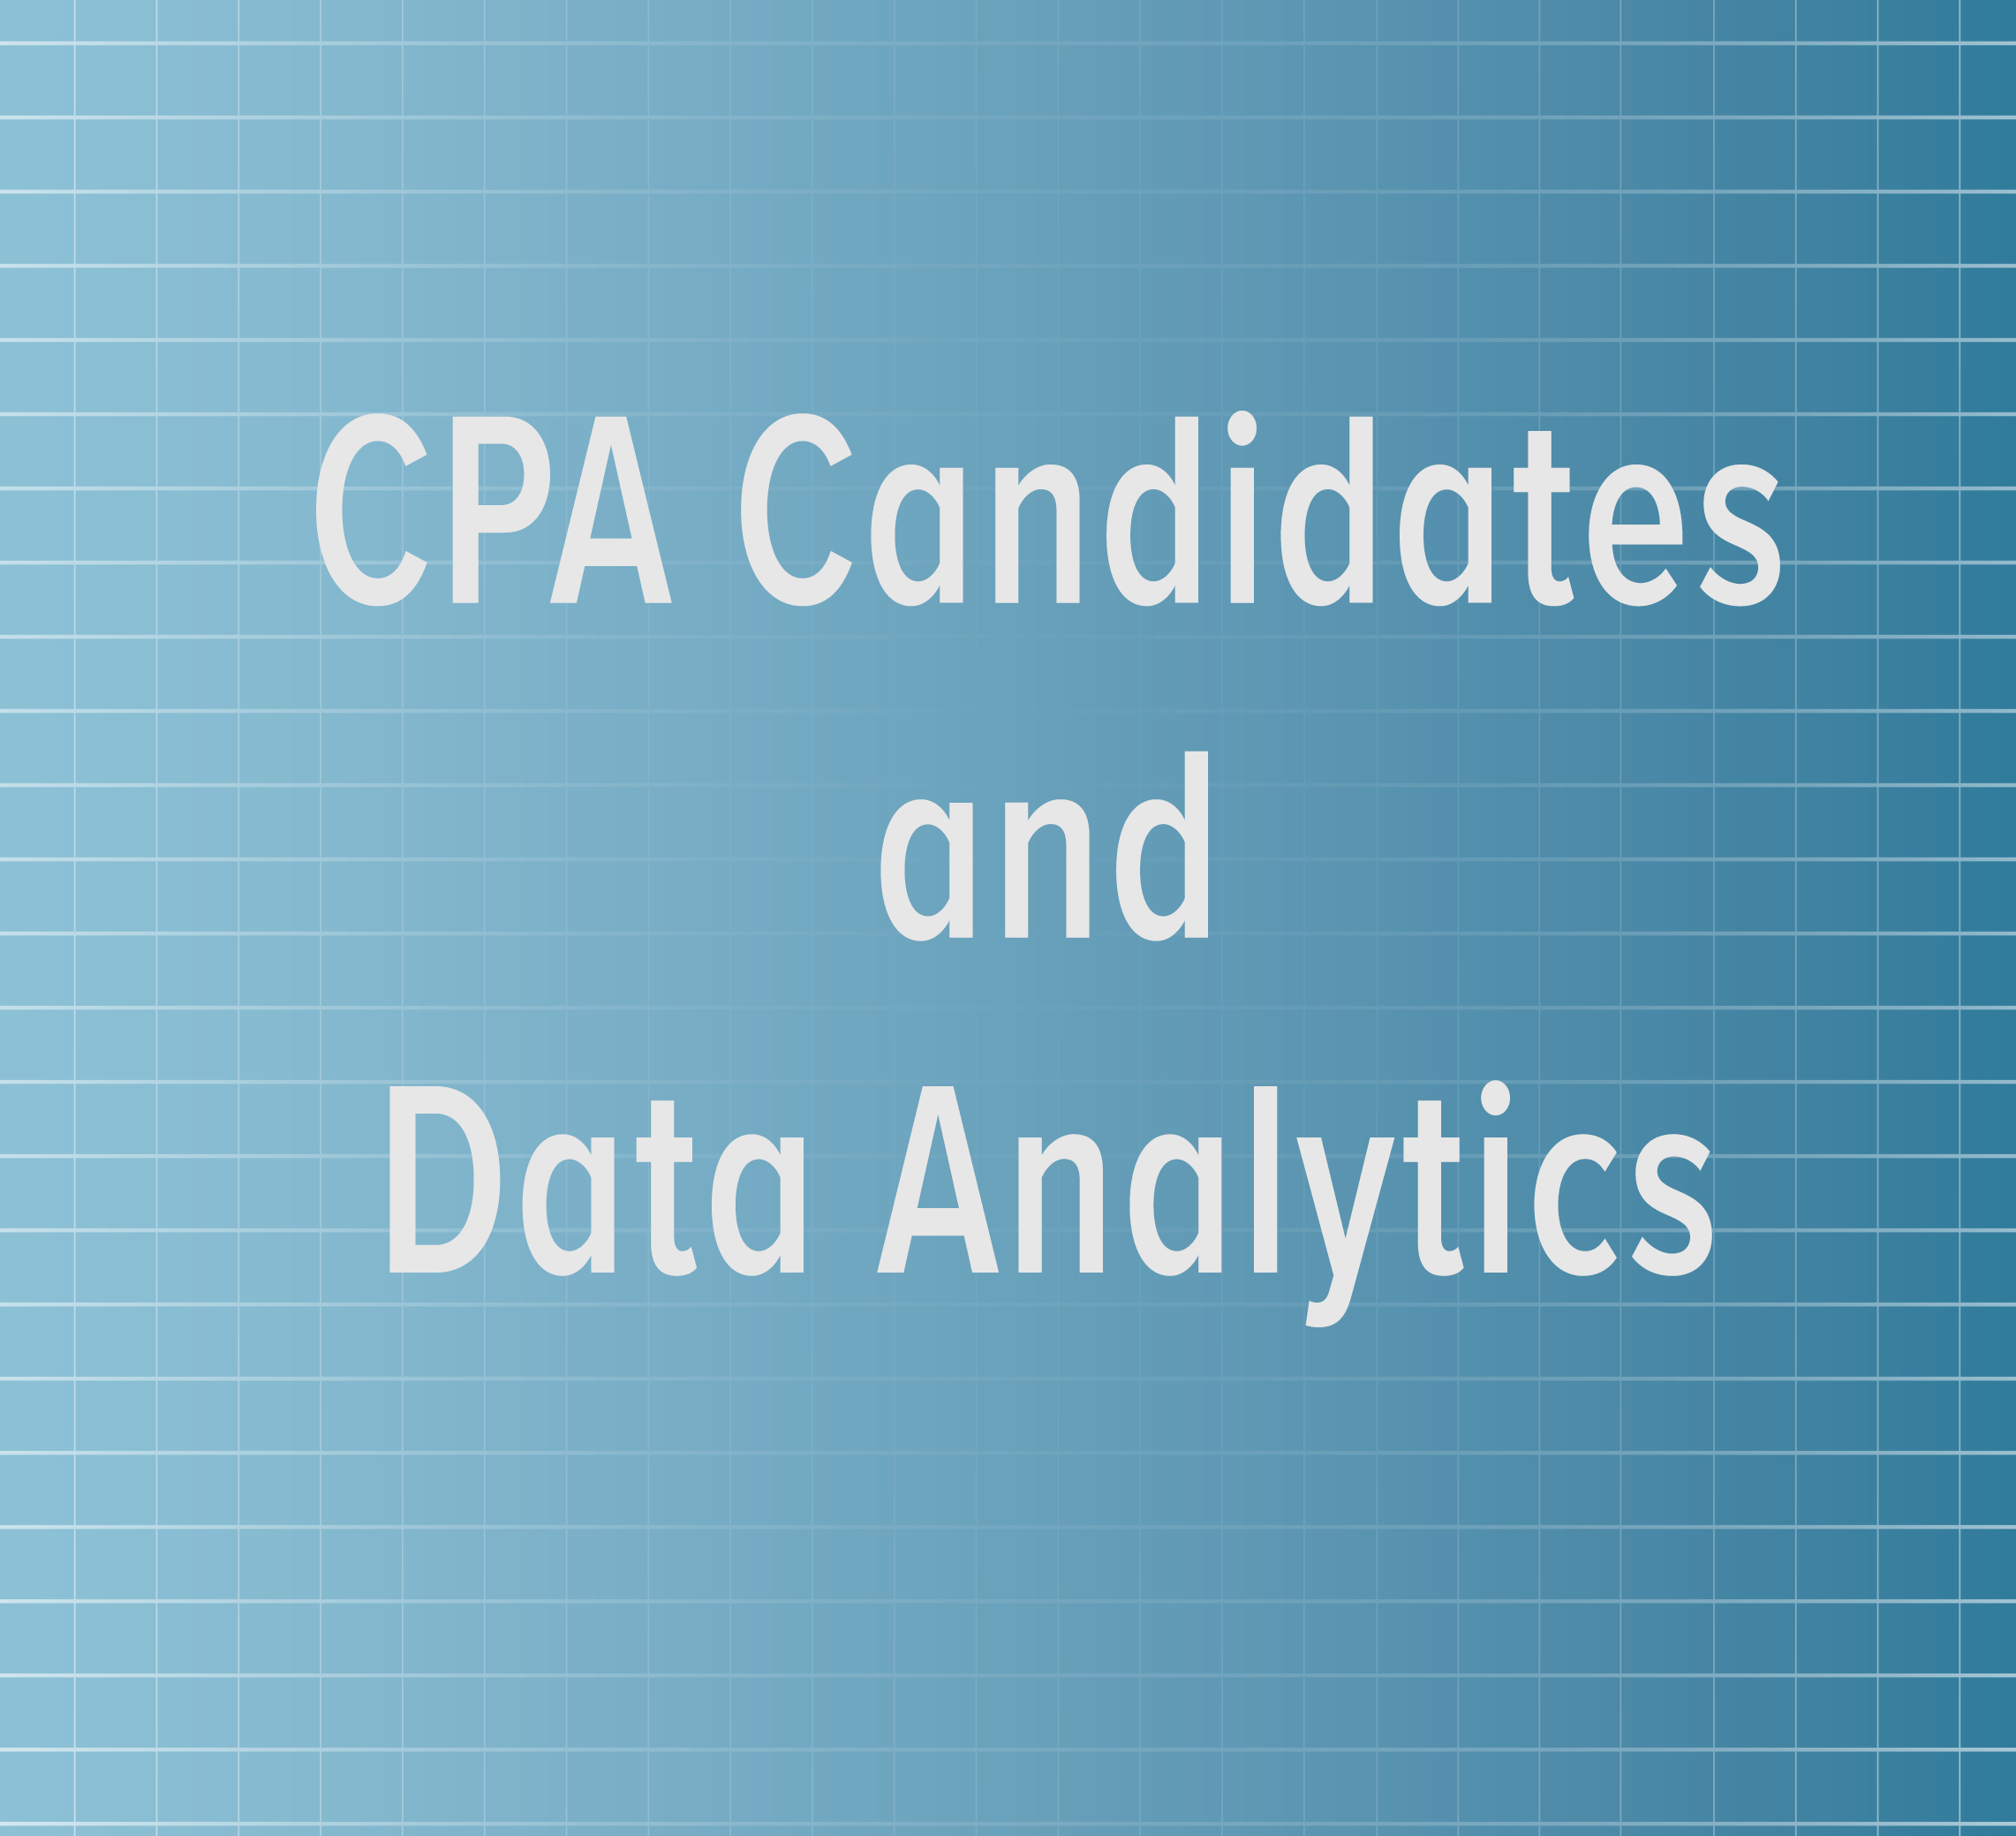 Video: Why CPA candidates should be studying data analytics